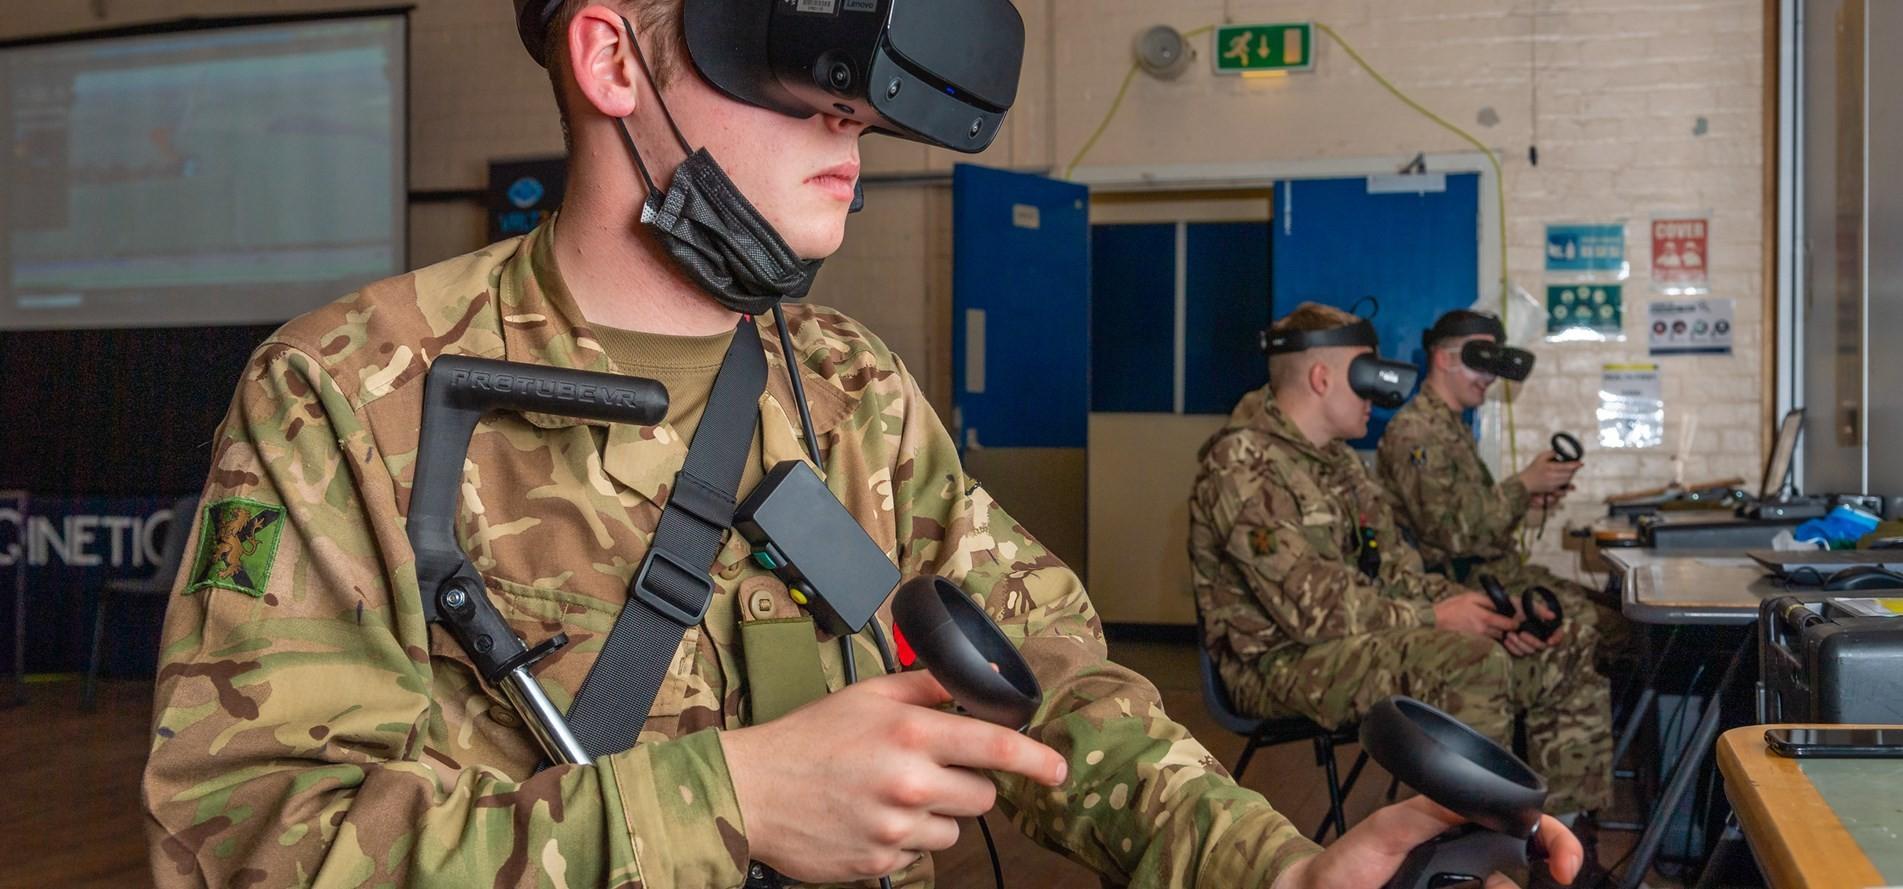 The British Army Warfighting Experiment 21 (AWE) is transforming the way soldiers train through use of digital technology